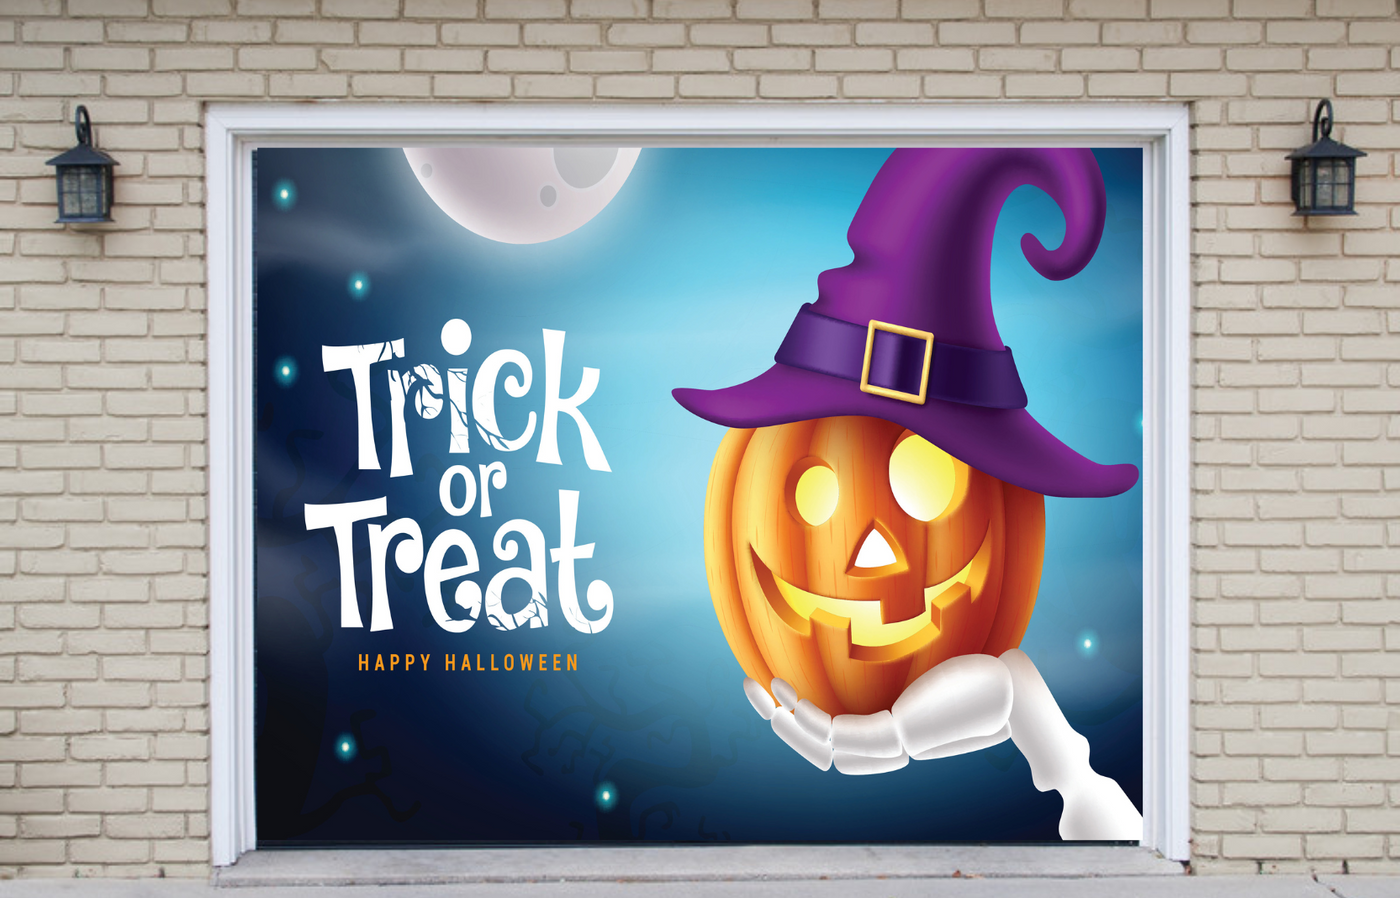 Happy Halloween And Trick Or Treat With Glowing Lantern Pumpkin Wearing Witch Hat In Moon Night Garage Door Cover Wrap Decoration